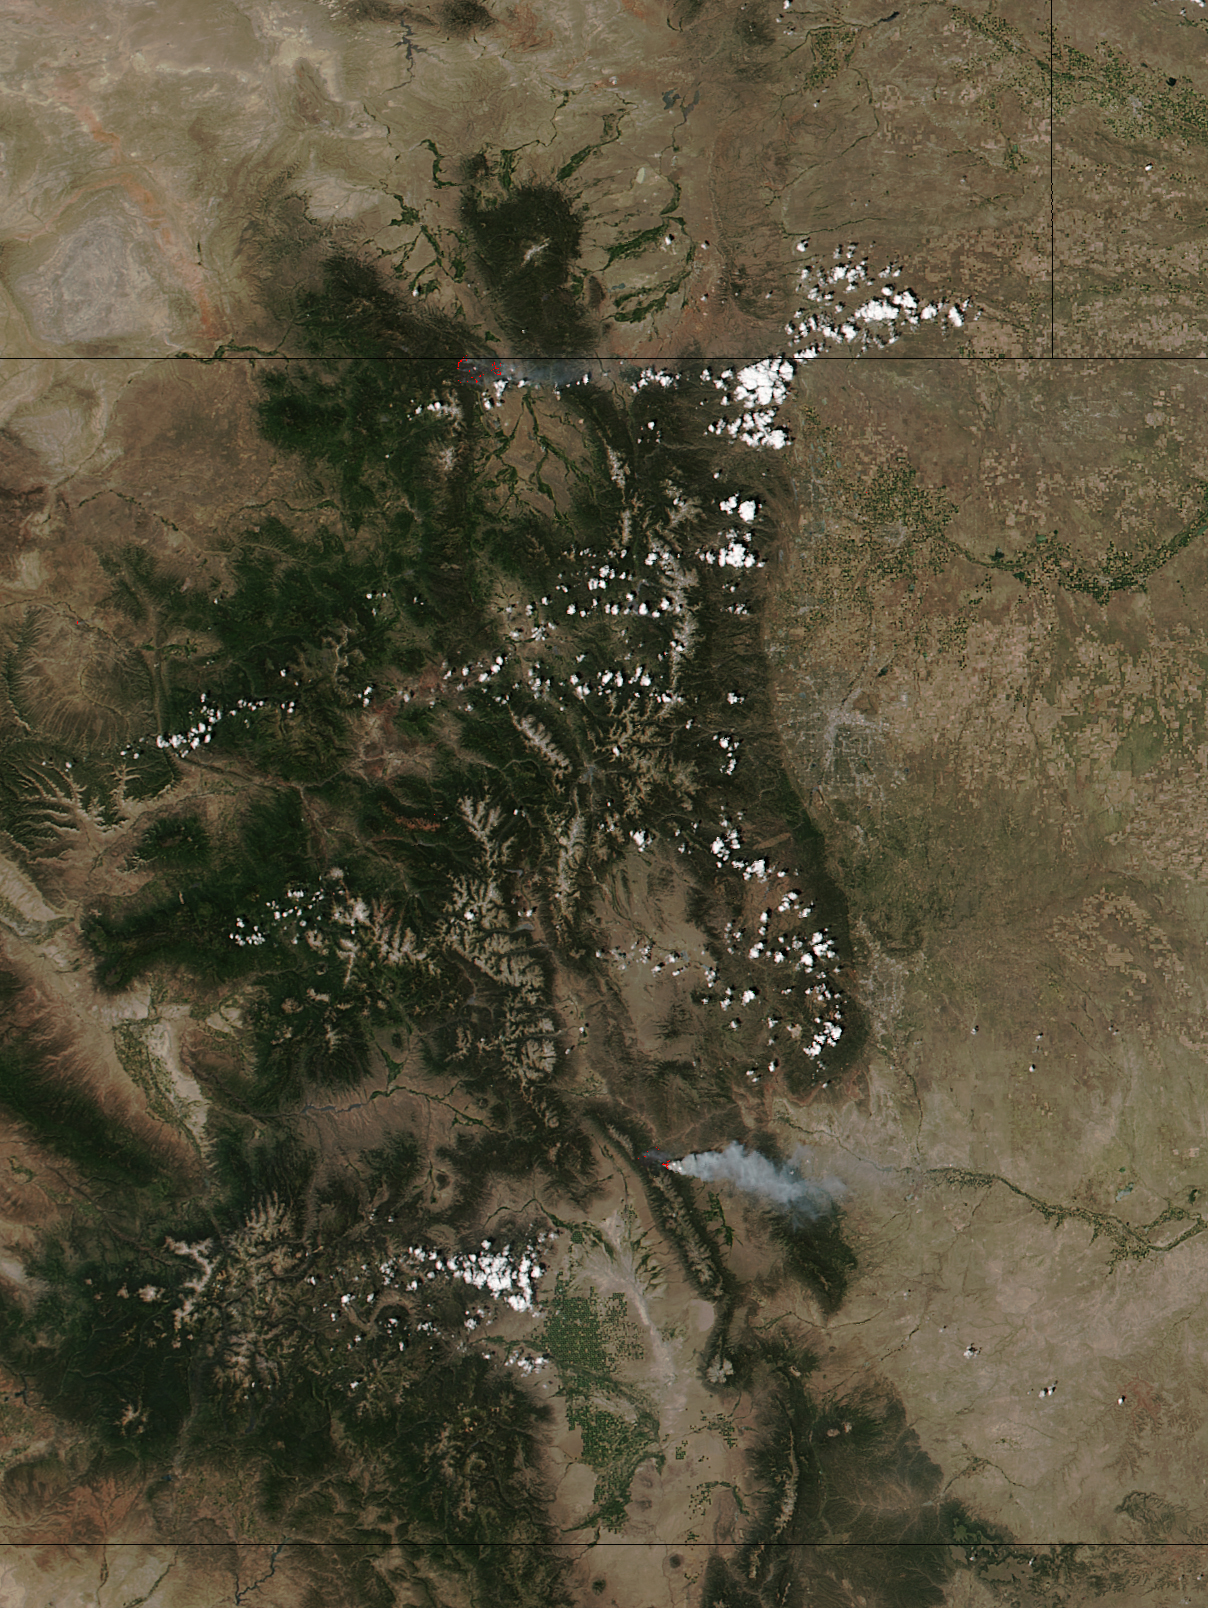 Hayden Pass and Beaver Creek Fires in Colorado - related image preview